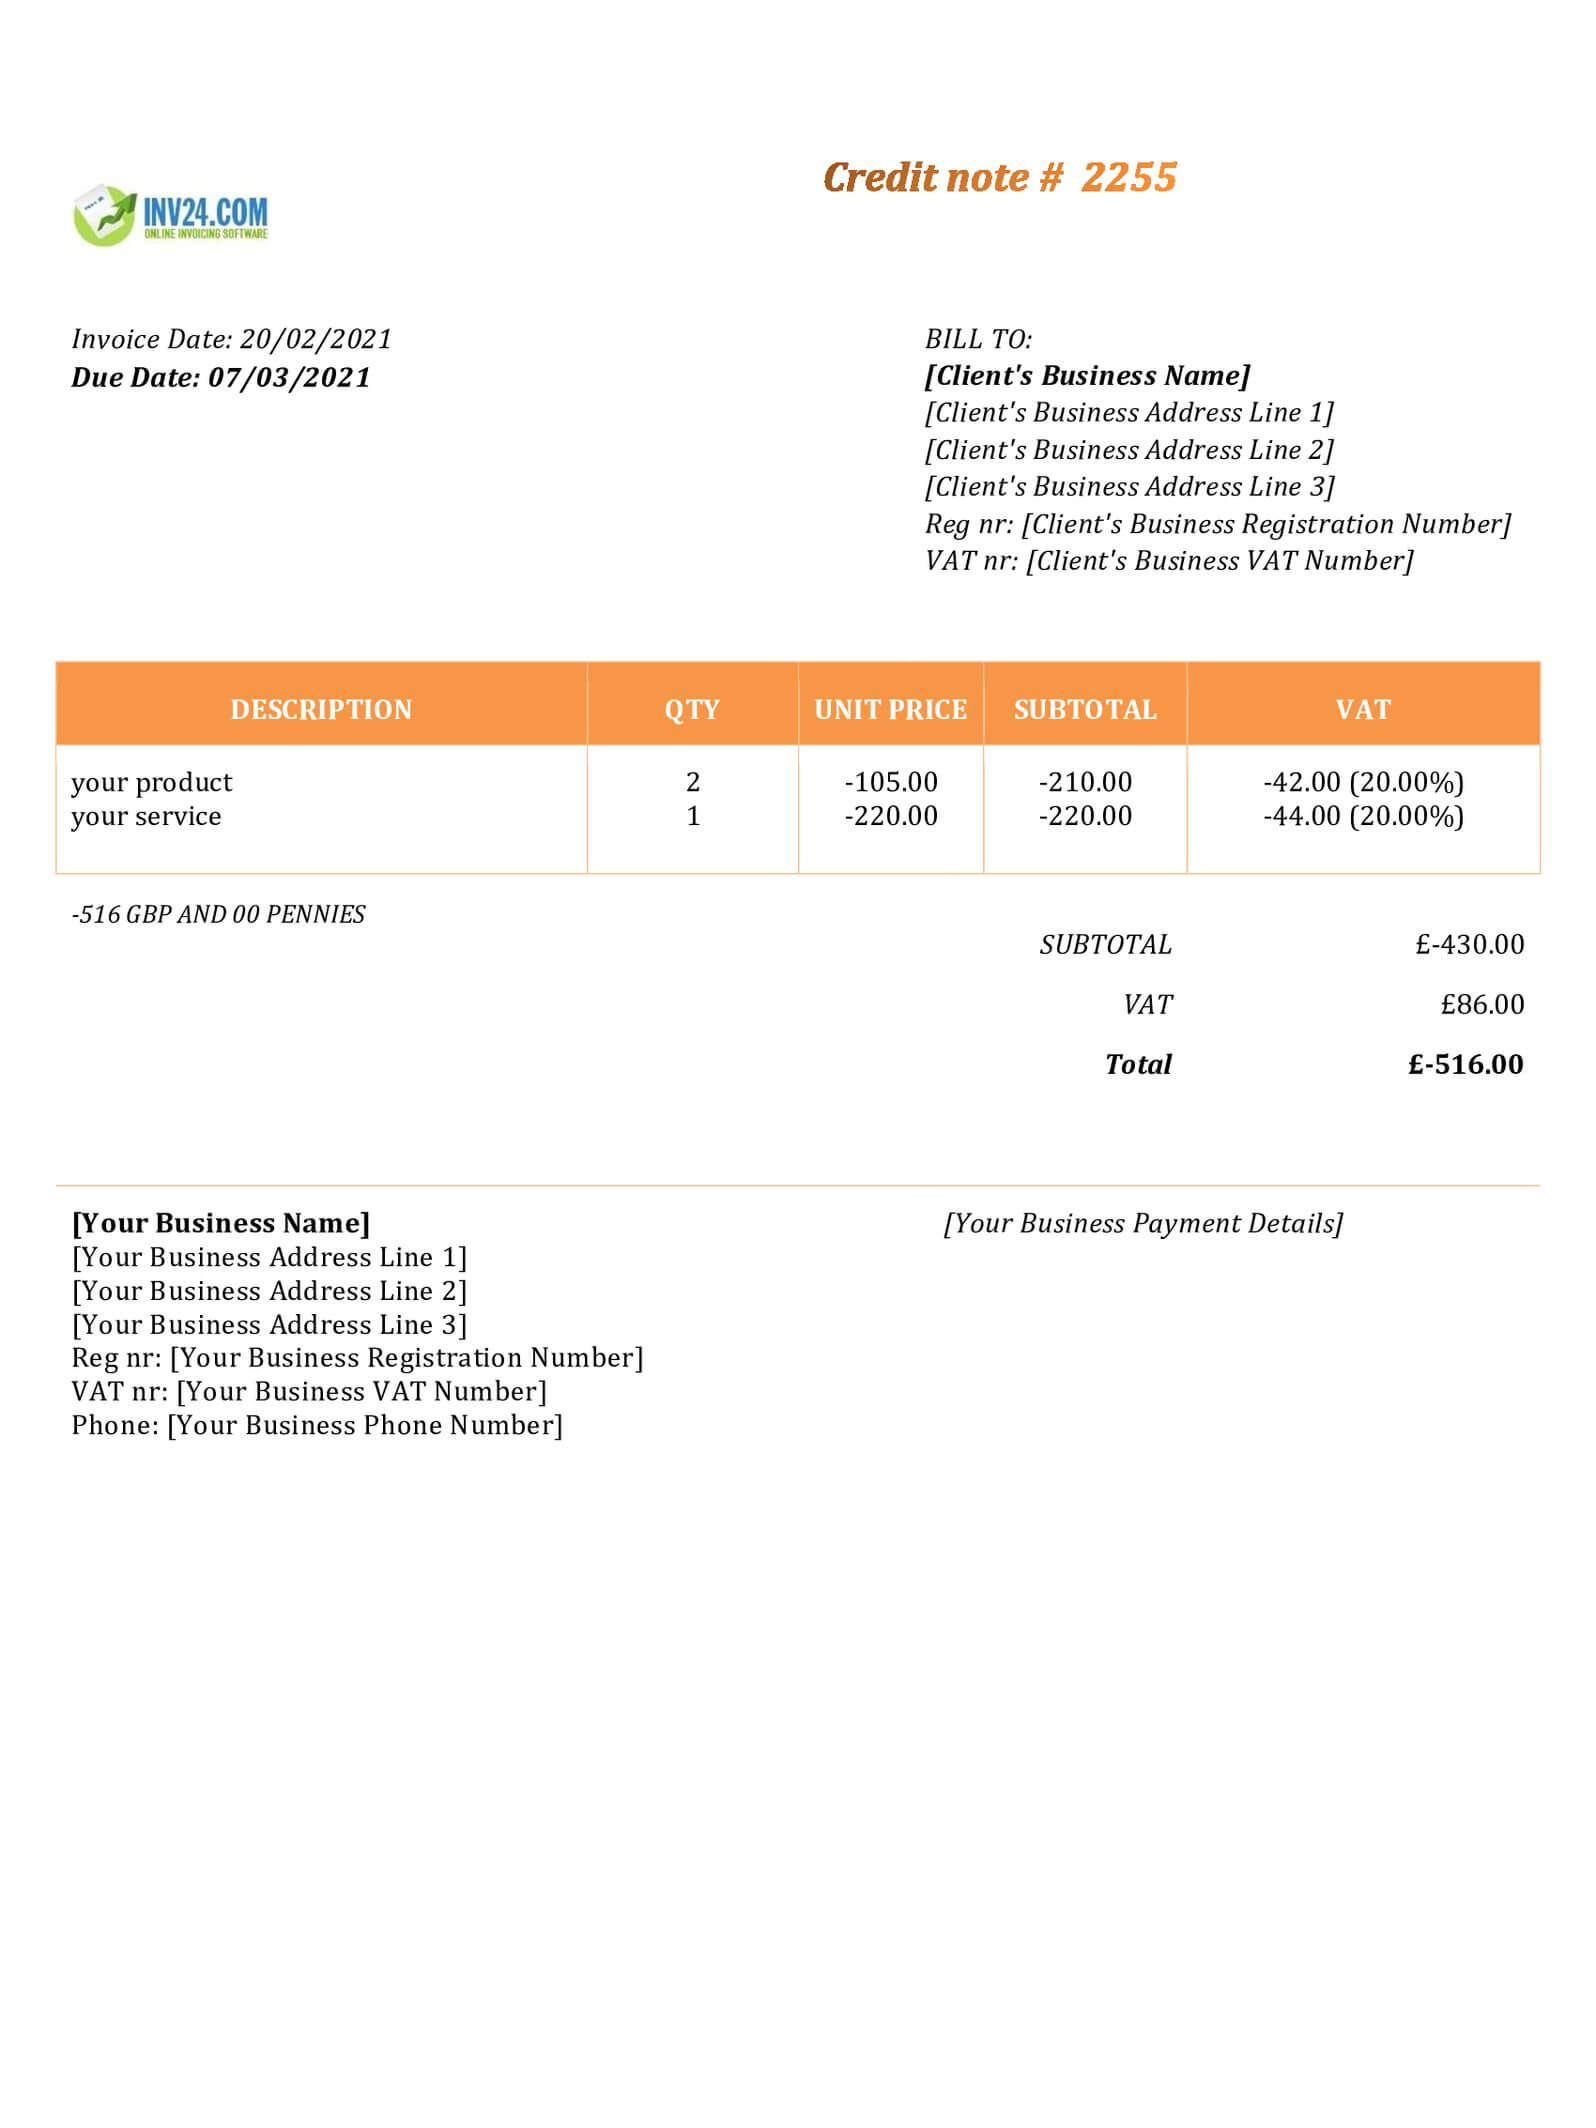 Credit Note Template Uk (Word)